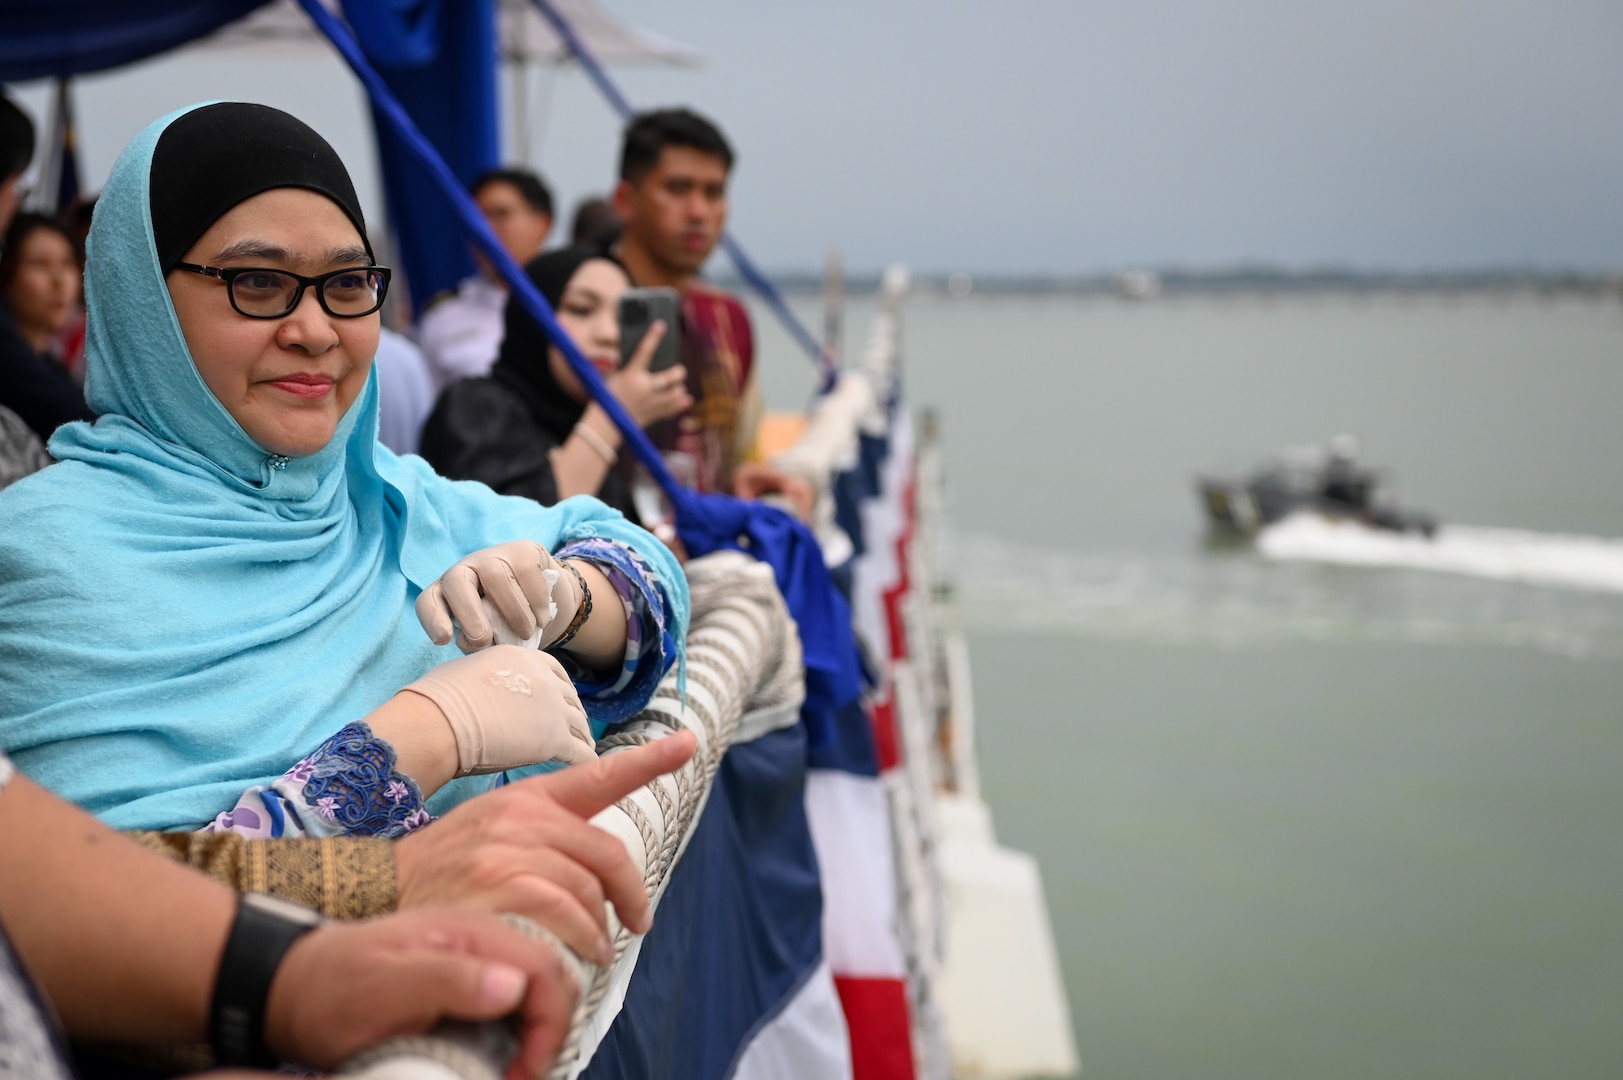 Dato’ Anis Rizana Binti Mohd Zainudin, the Director General of Royal Malaysian Customs, watches several customs boats transit near U.S. Coast Guard Cutter Bertholf (WMSL 750) while the cutter was moored in Port Klang, Malaysia, March 2, 2024. This was the first time a U.S. Coast Guard vessel has moored in Port Klang. (U.S. Coast Guard photo by Petty Officer Steve Strohmaier)